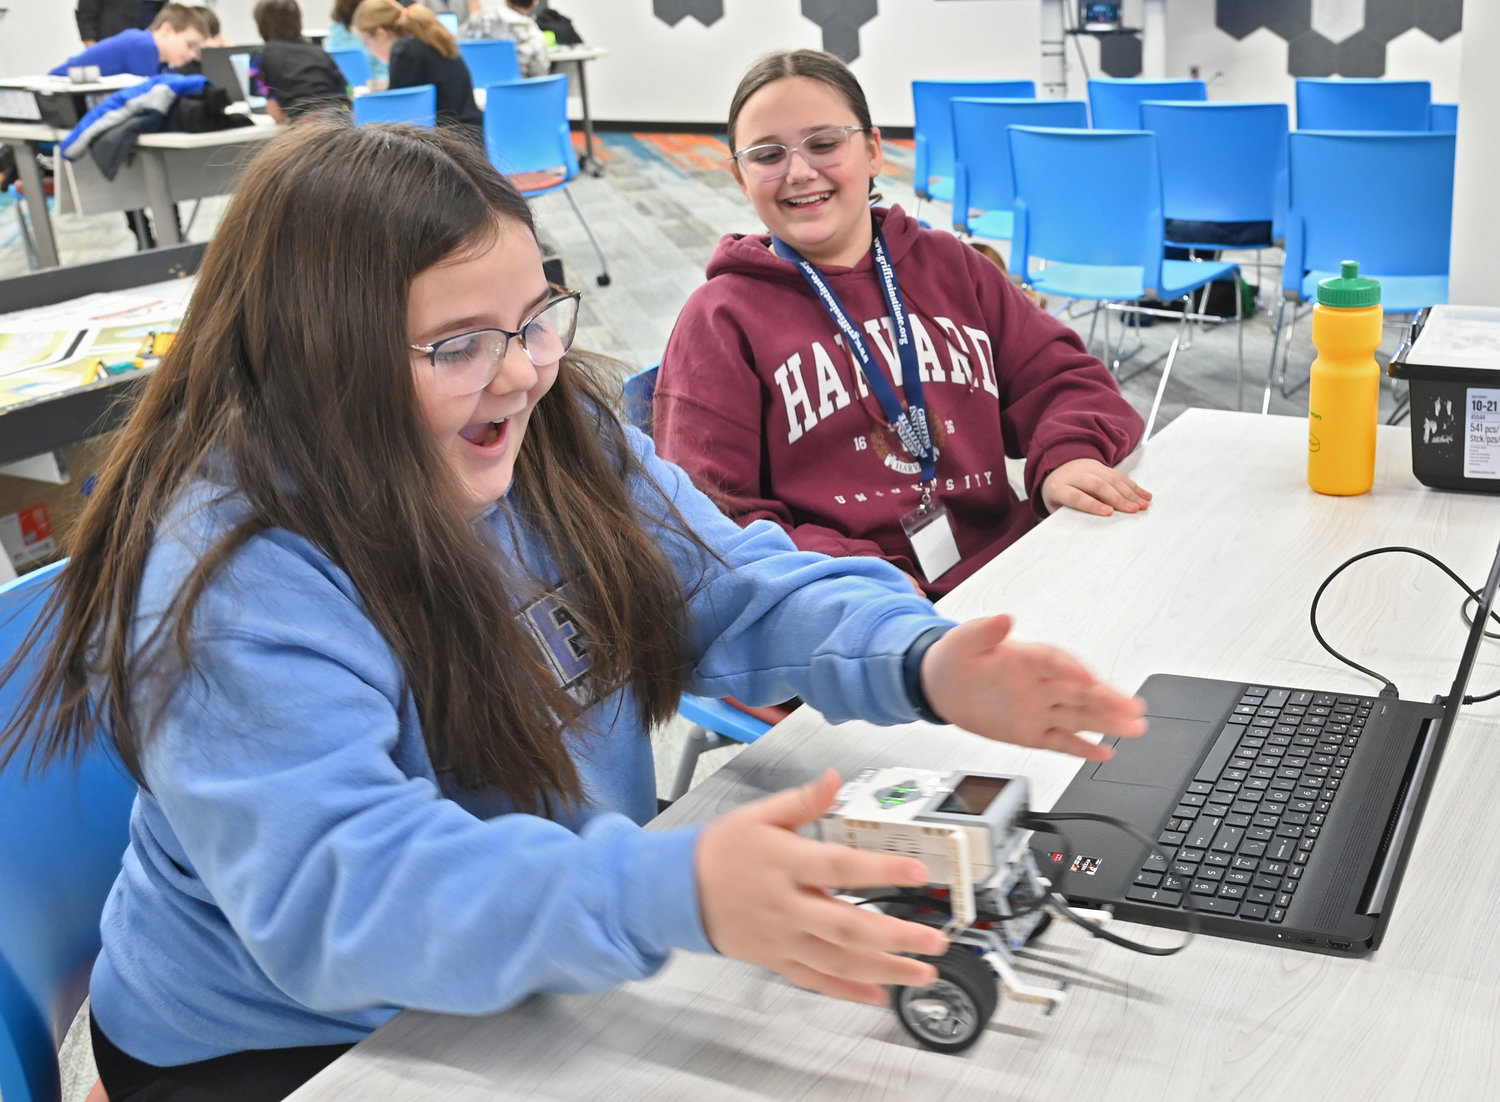 Victoria Parra, a fourth-grader at Bellamy Elementary School and Mackenzie Short, a fifth-grader at Gansevoort Elementary School, react to their robot successfully completing a command on Tuesday, Feb. 21, at Griffiss Institute’s Robotics Camp in Rome.